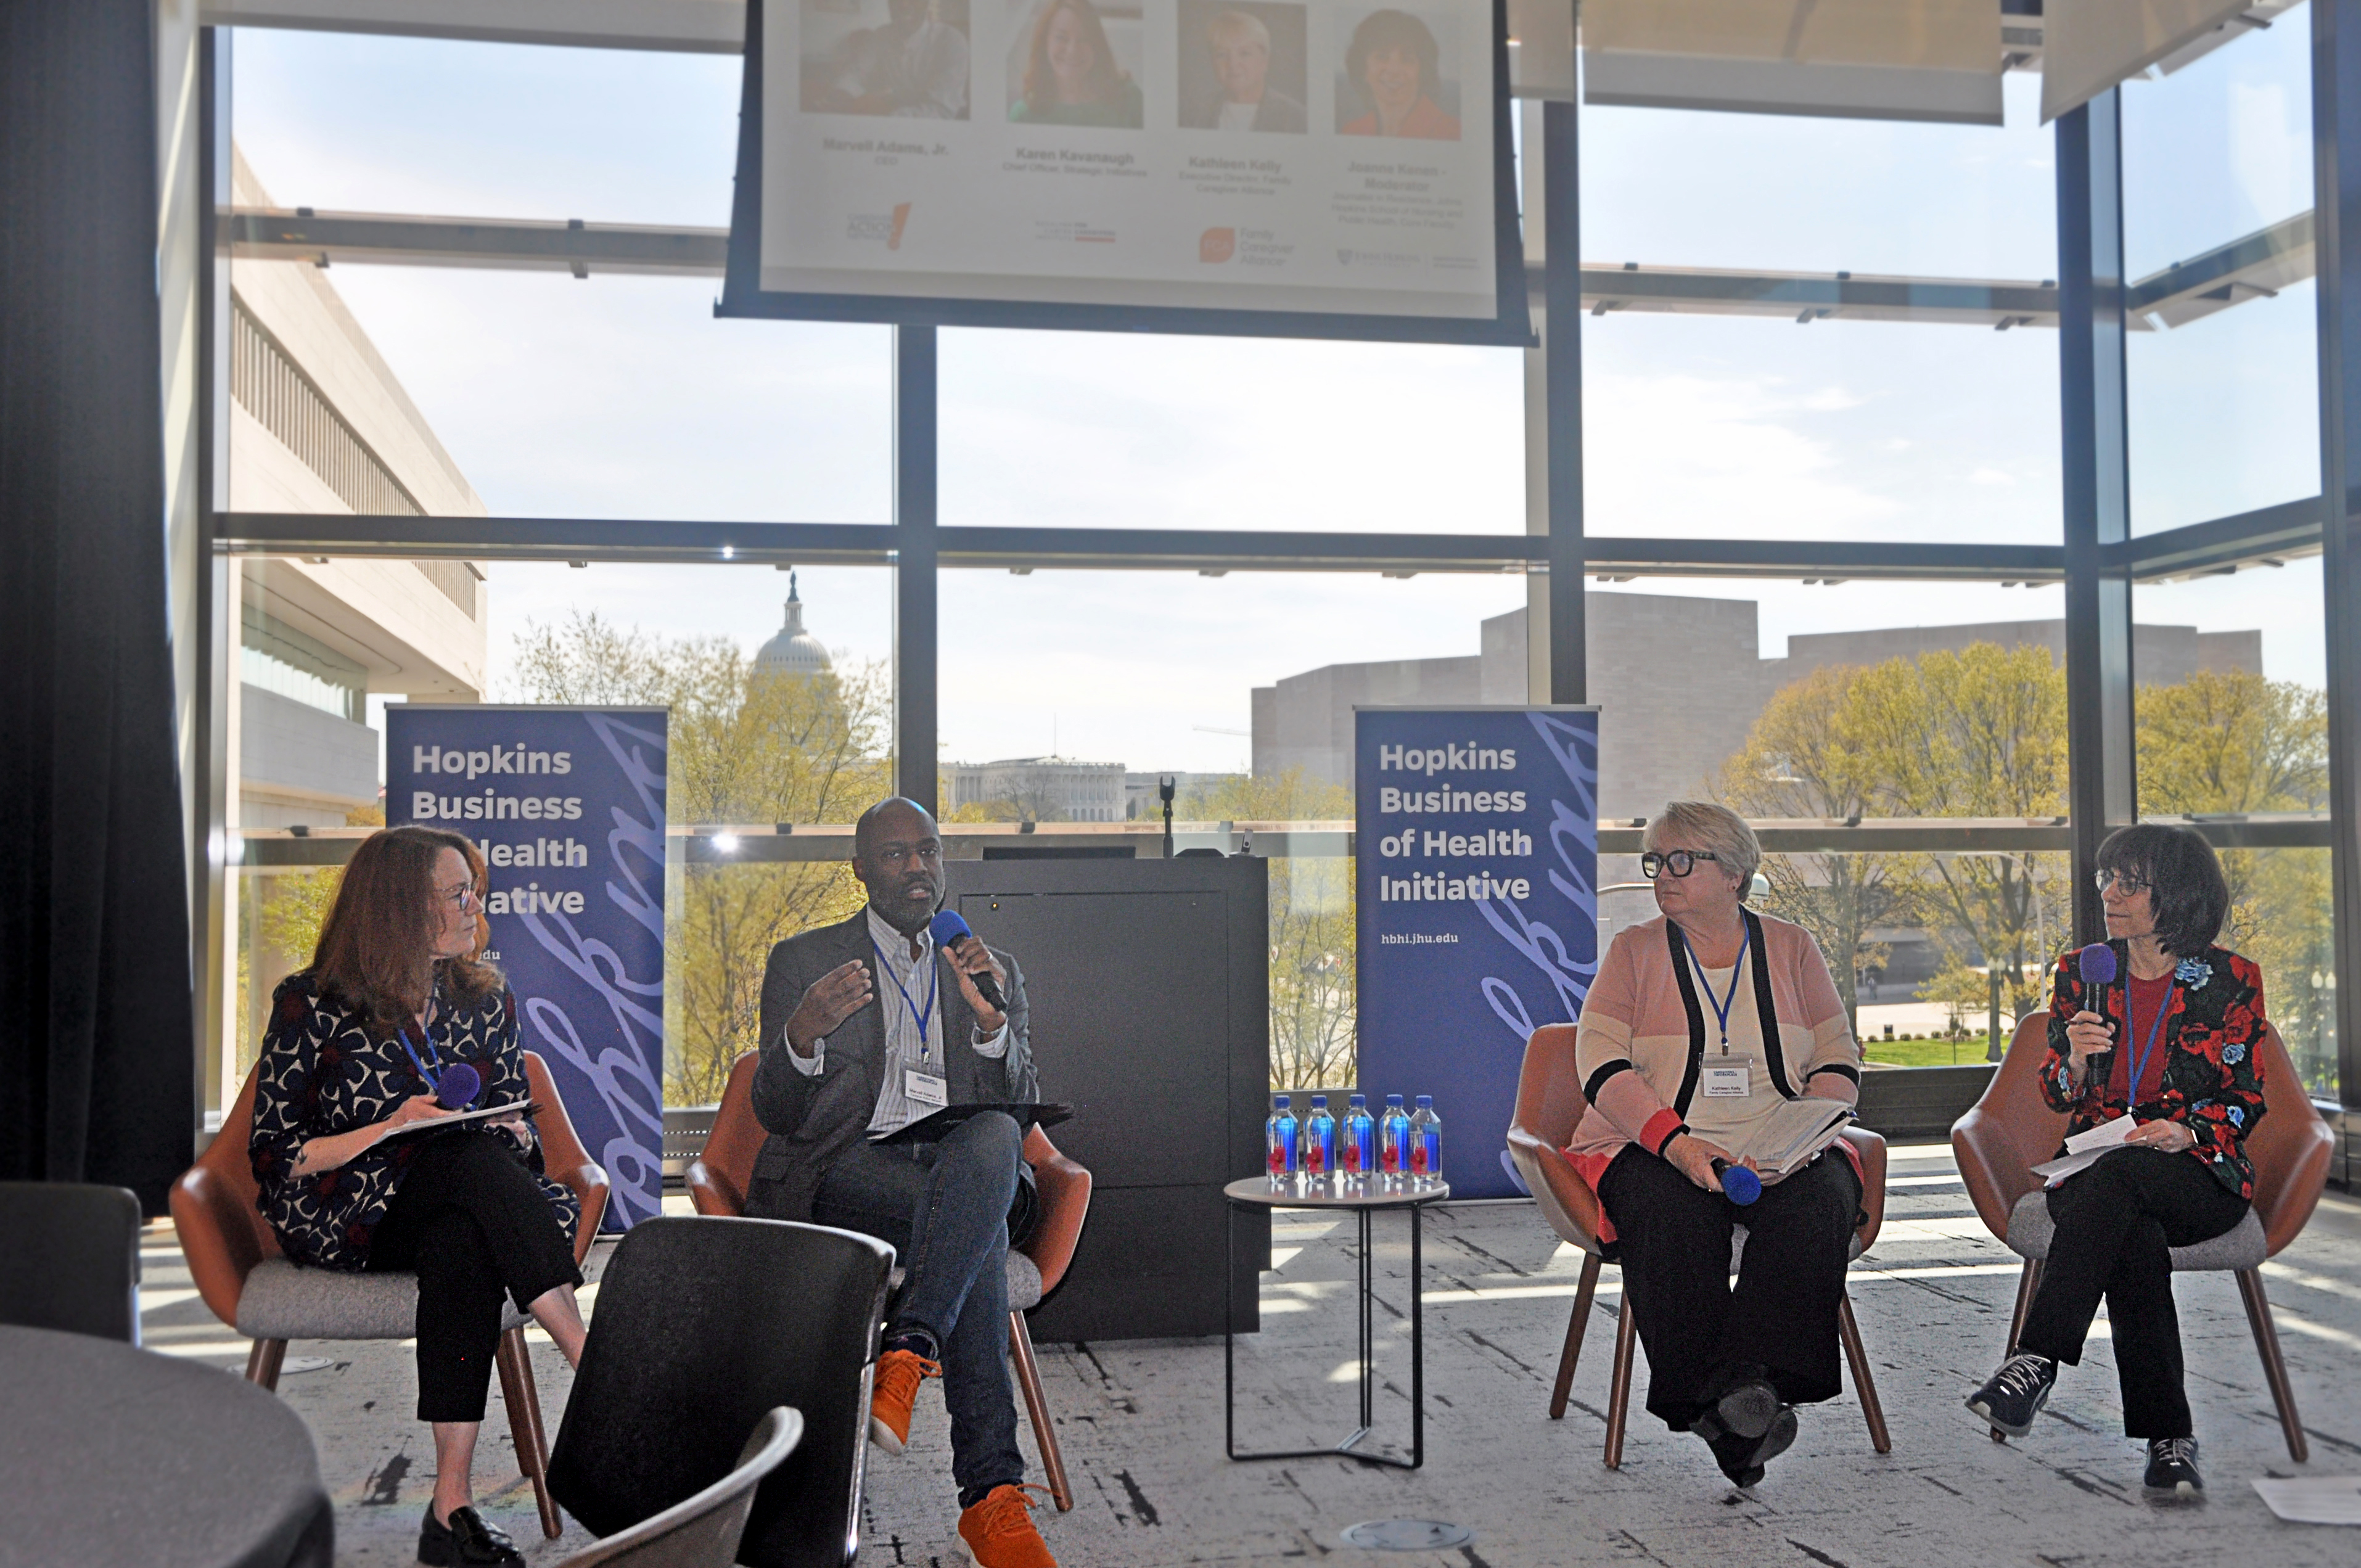 Left to right: Karen Kavanaugh, chief officer, strategic initiatives, Rosalynn Carter Institute for Caregivers; Marvell Adams Jr., CEO, Caregiver Action Network; Kathleen Kelly, executive director, Family Caregiver Alliance; and moderator Joanne Kenen, Commonwealth Fund journalist-in-residence, Johns Hopkins Bloomberg School of Public Health